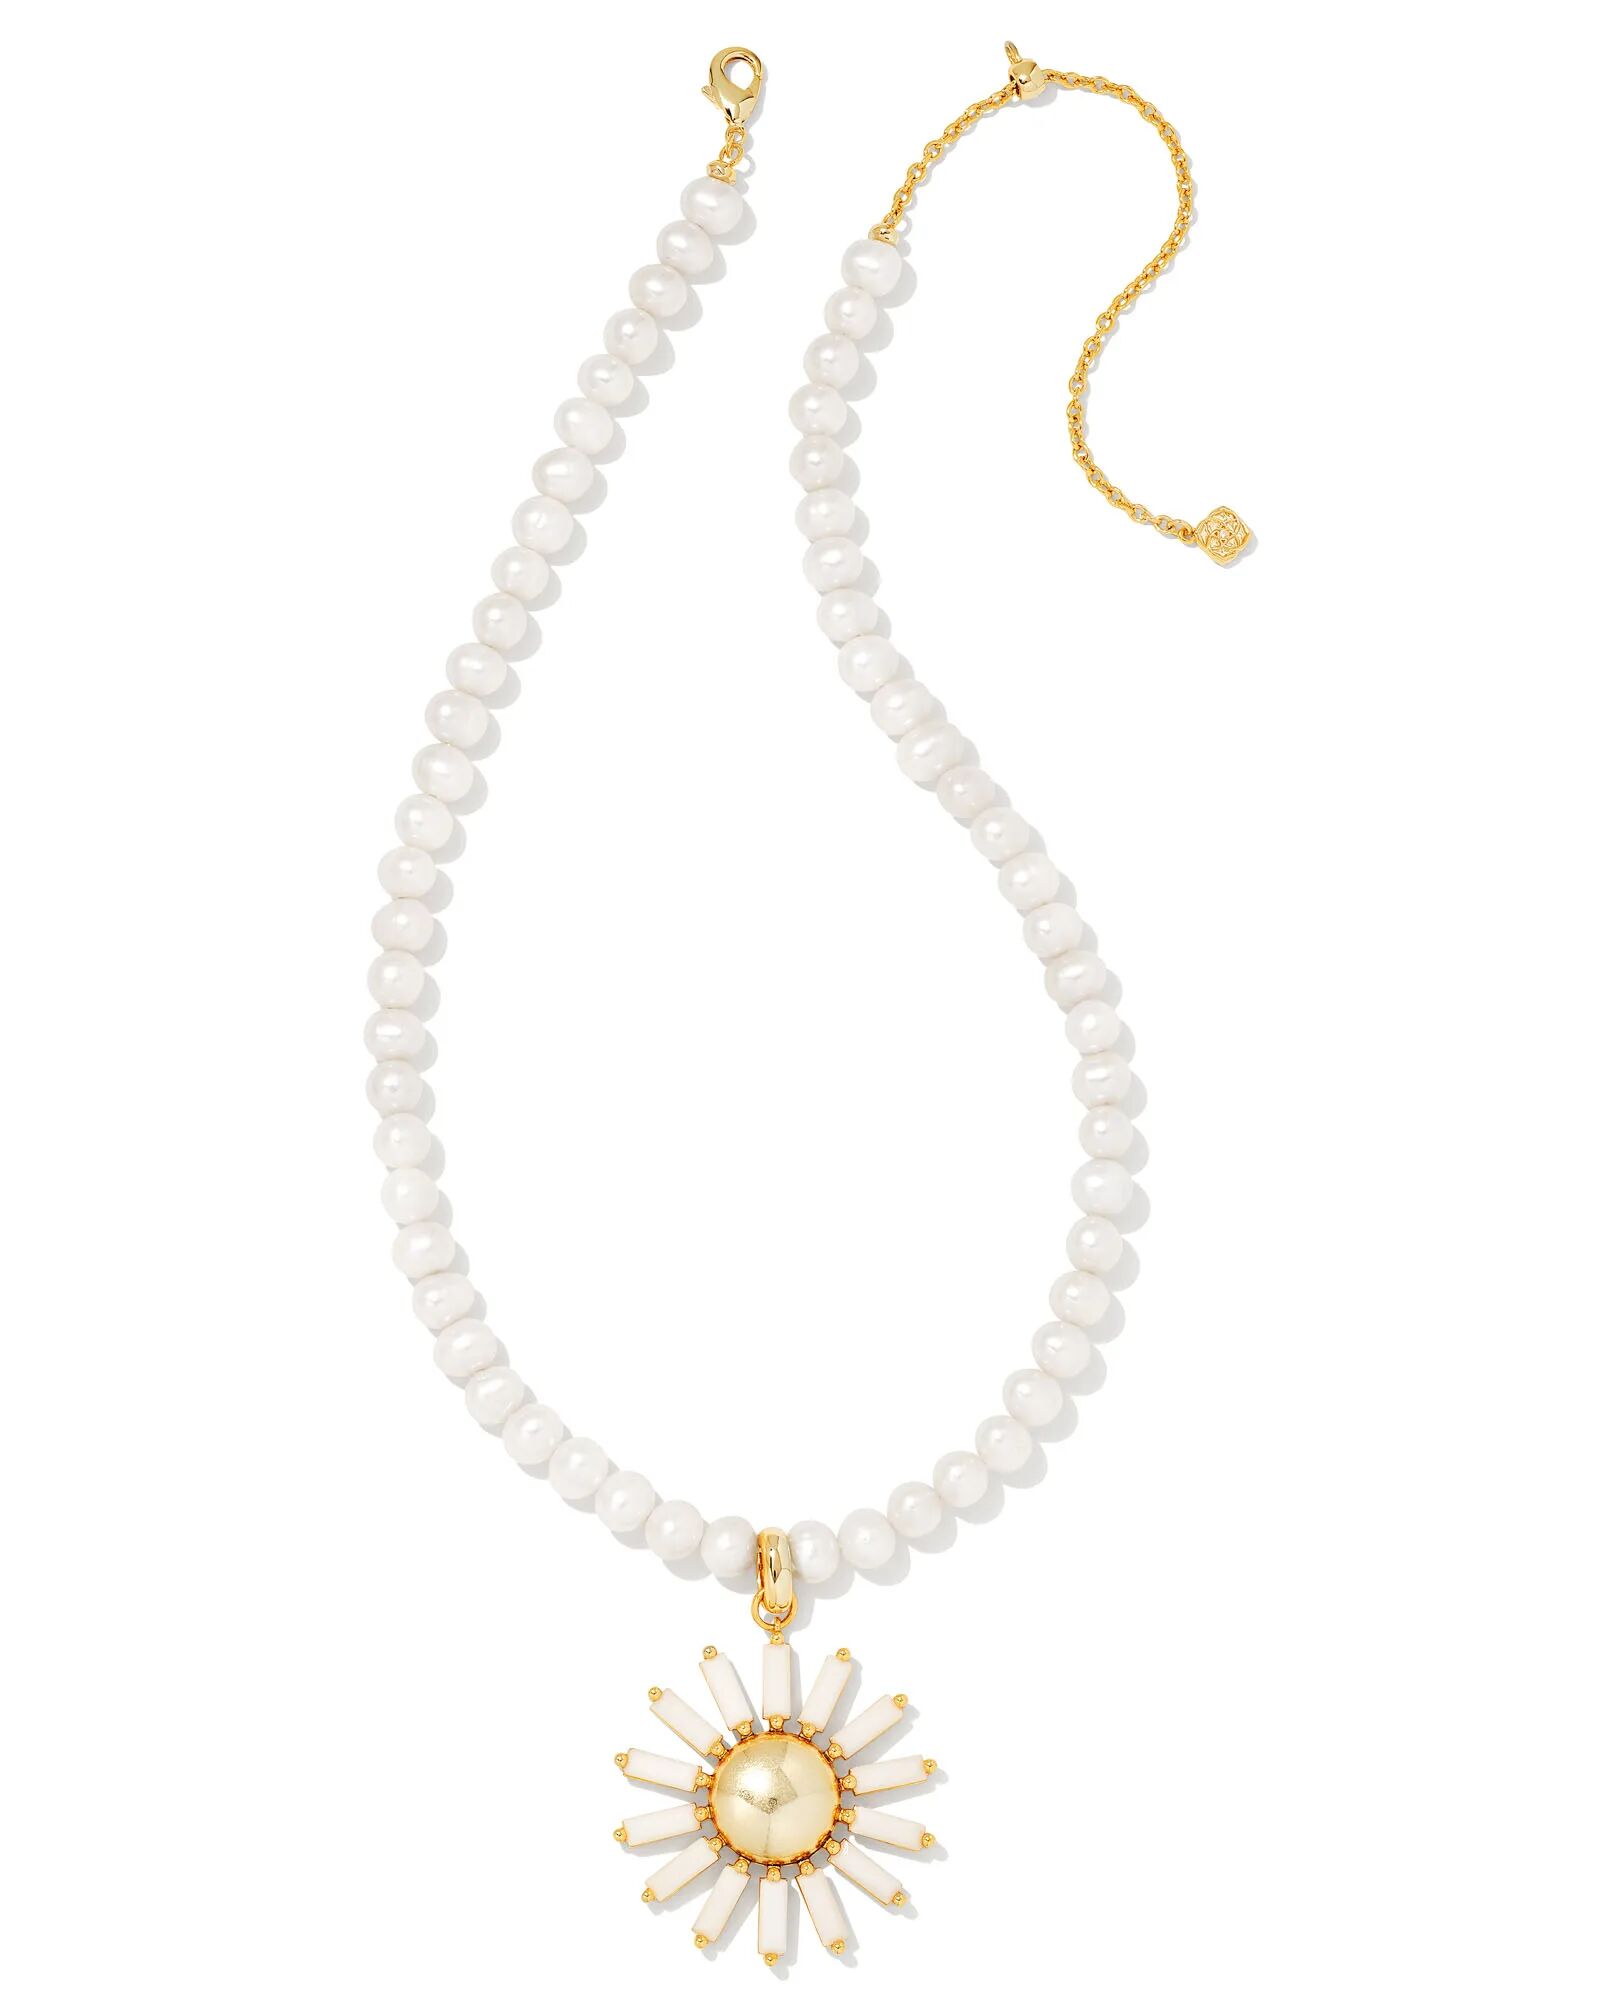 Kendra Scott Madison Daisy Convertible Gold Pearl Statement Necklace in White   Opaque Glass